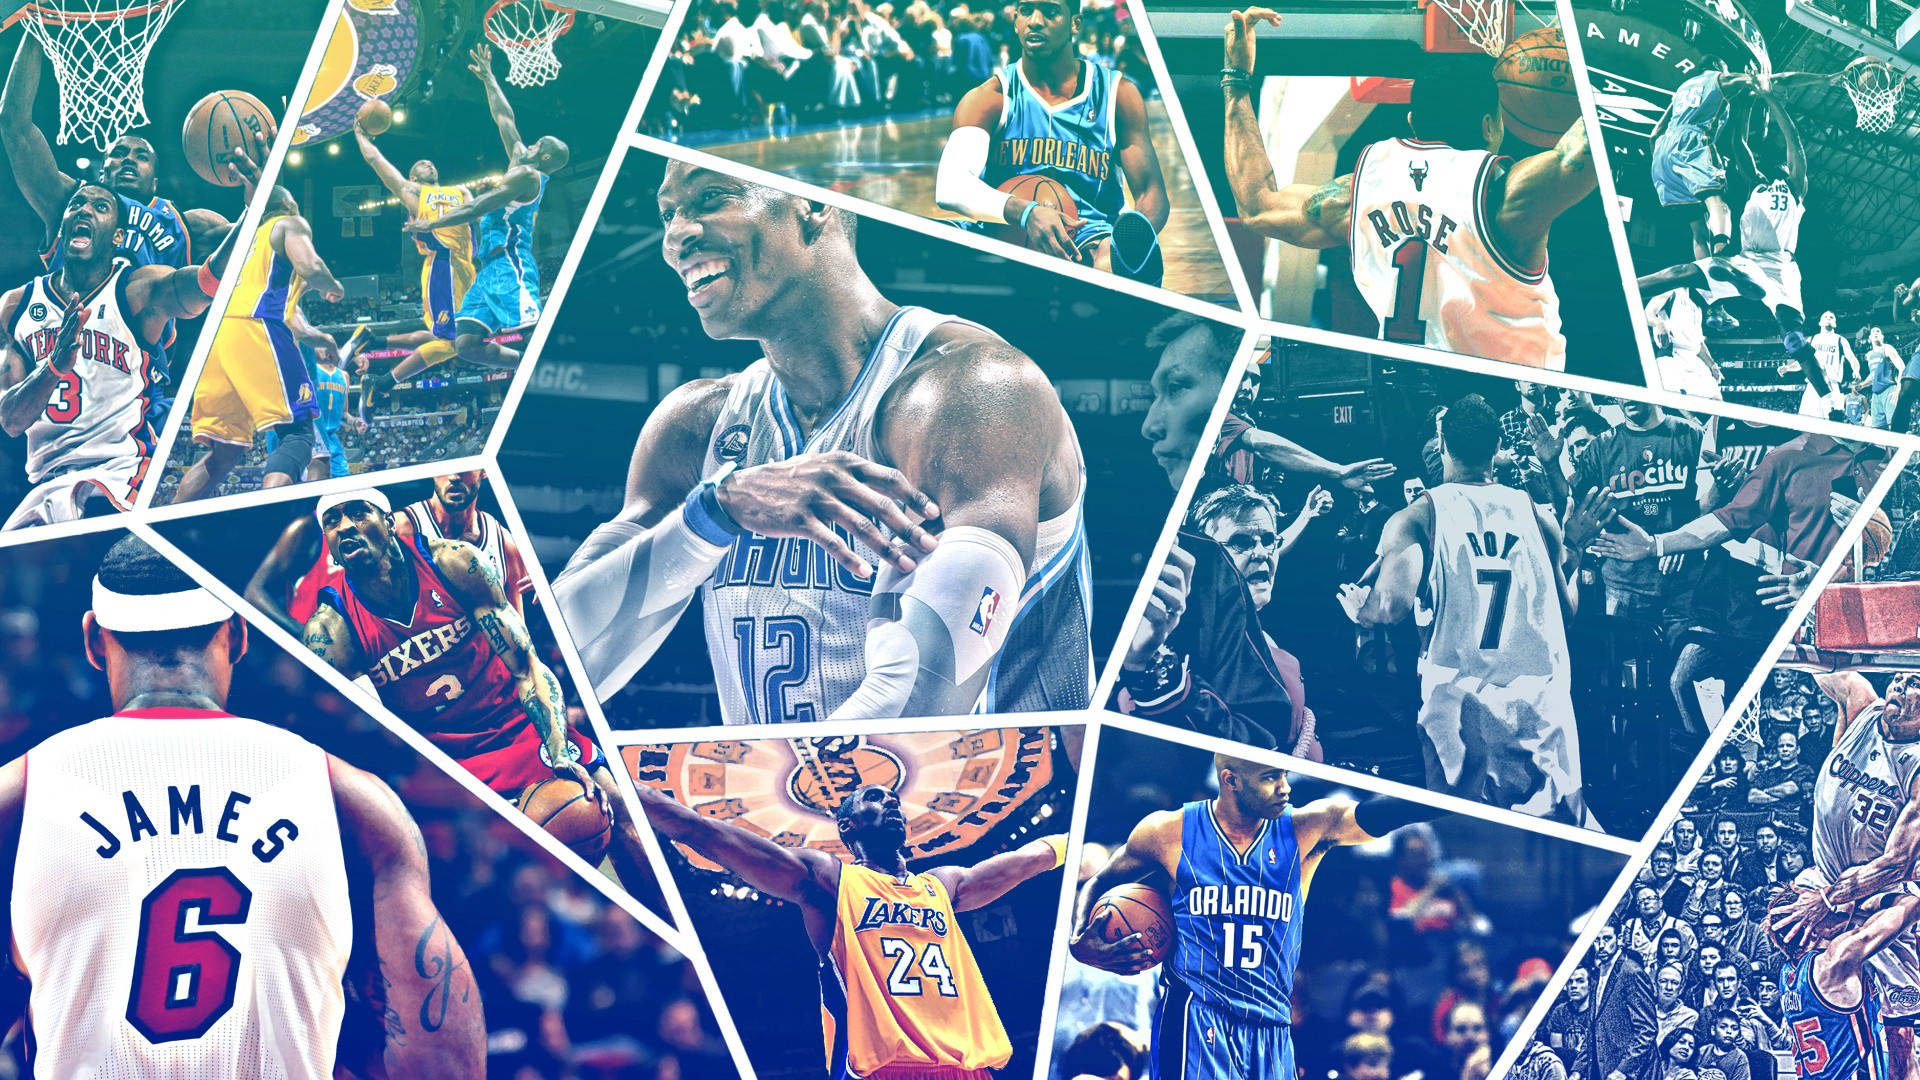 Showcasing some of the greatest NBA superstars of this generation Wallpaper